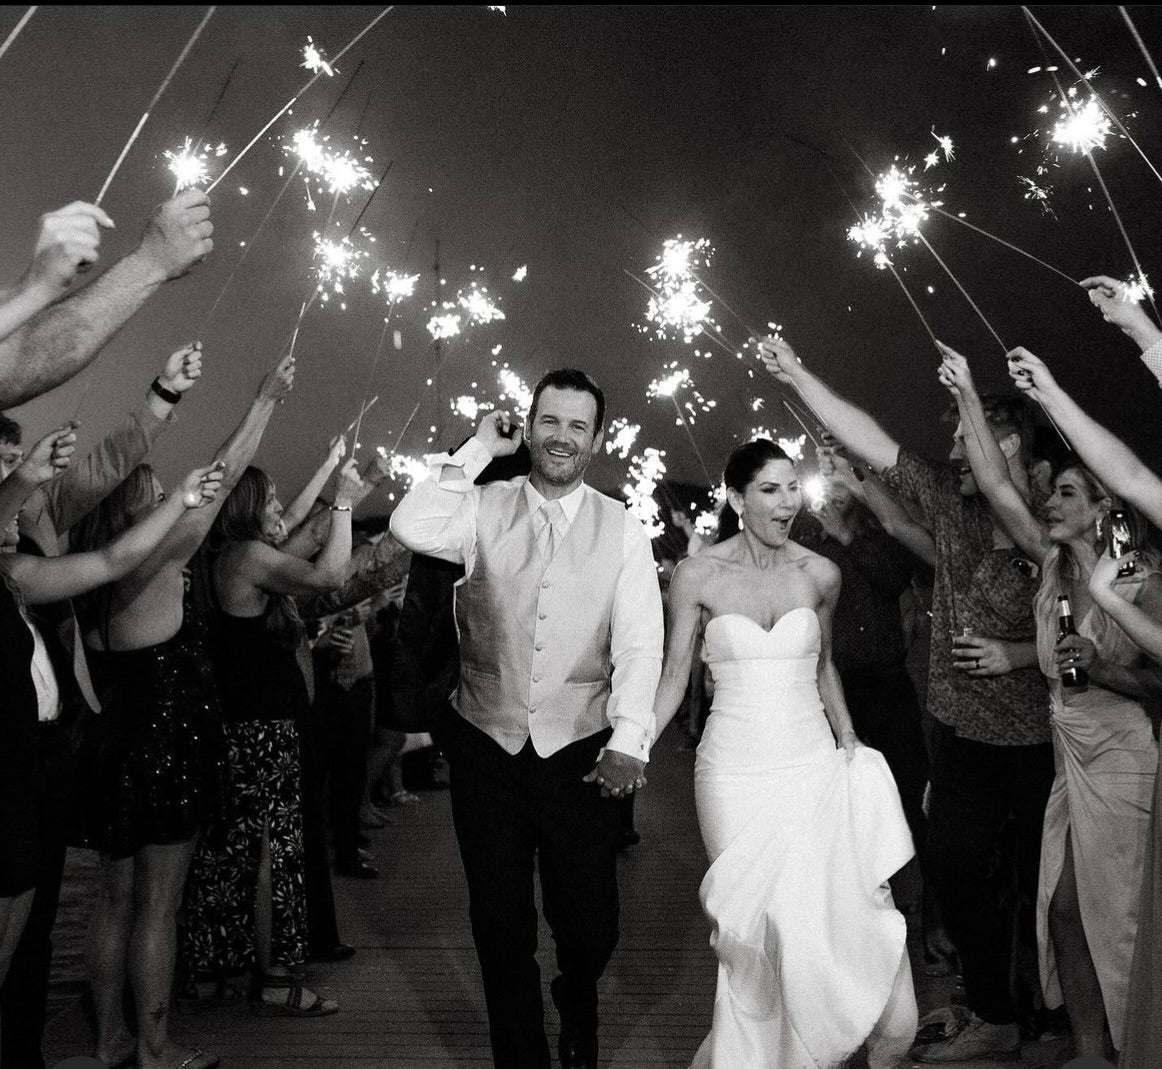 Light Up Your Wedding Send-Off: How Many Lighters Do You Need for Wedding Sparklers?